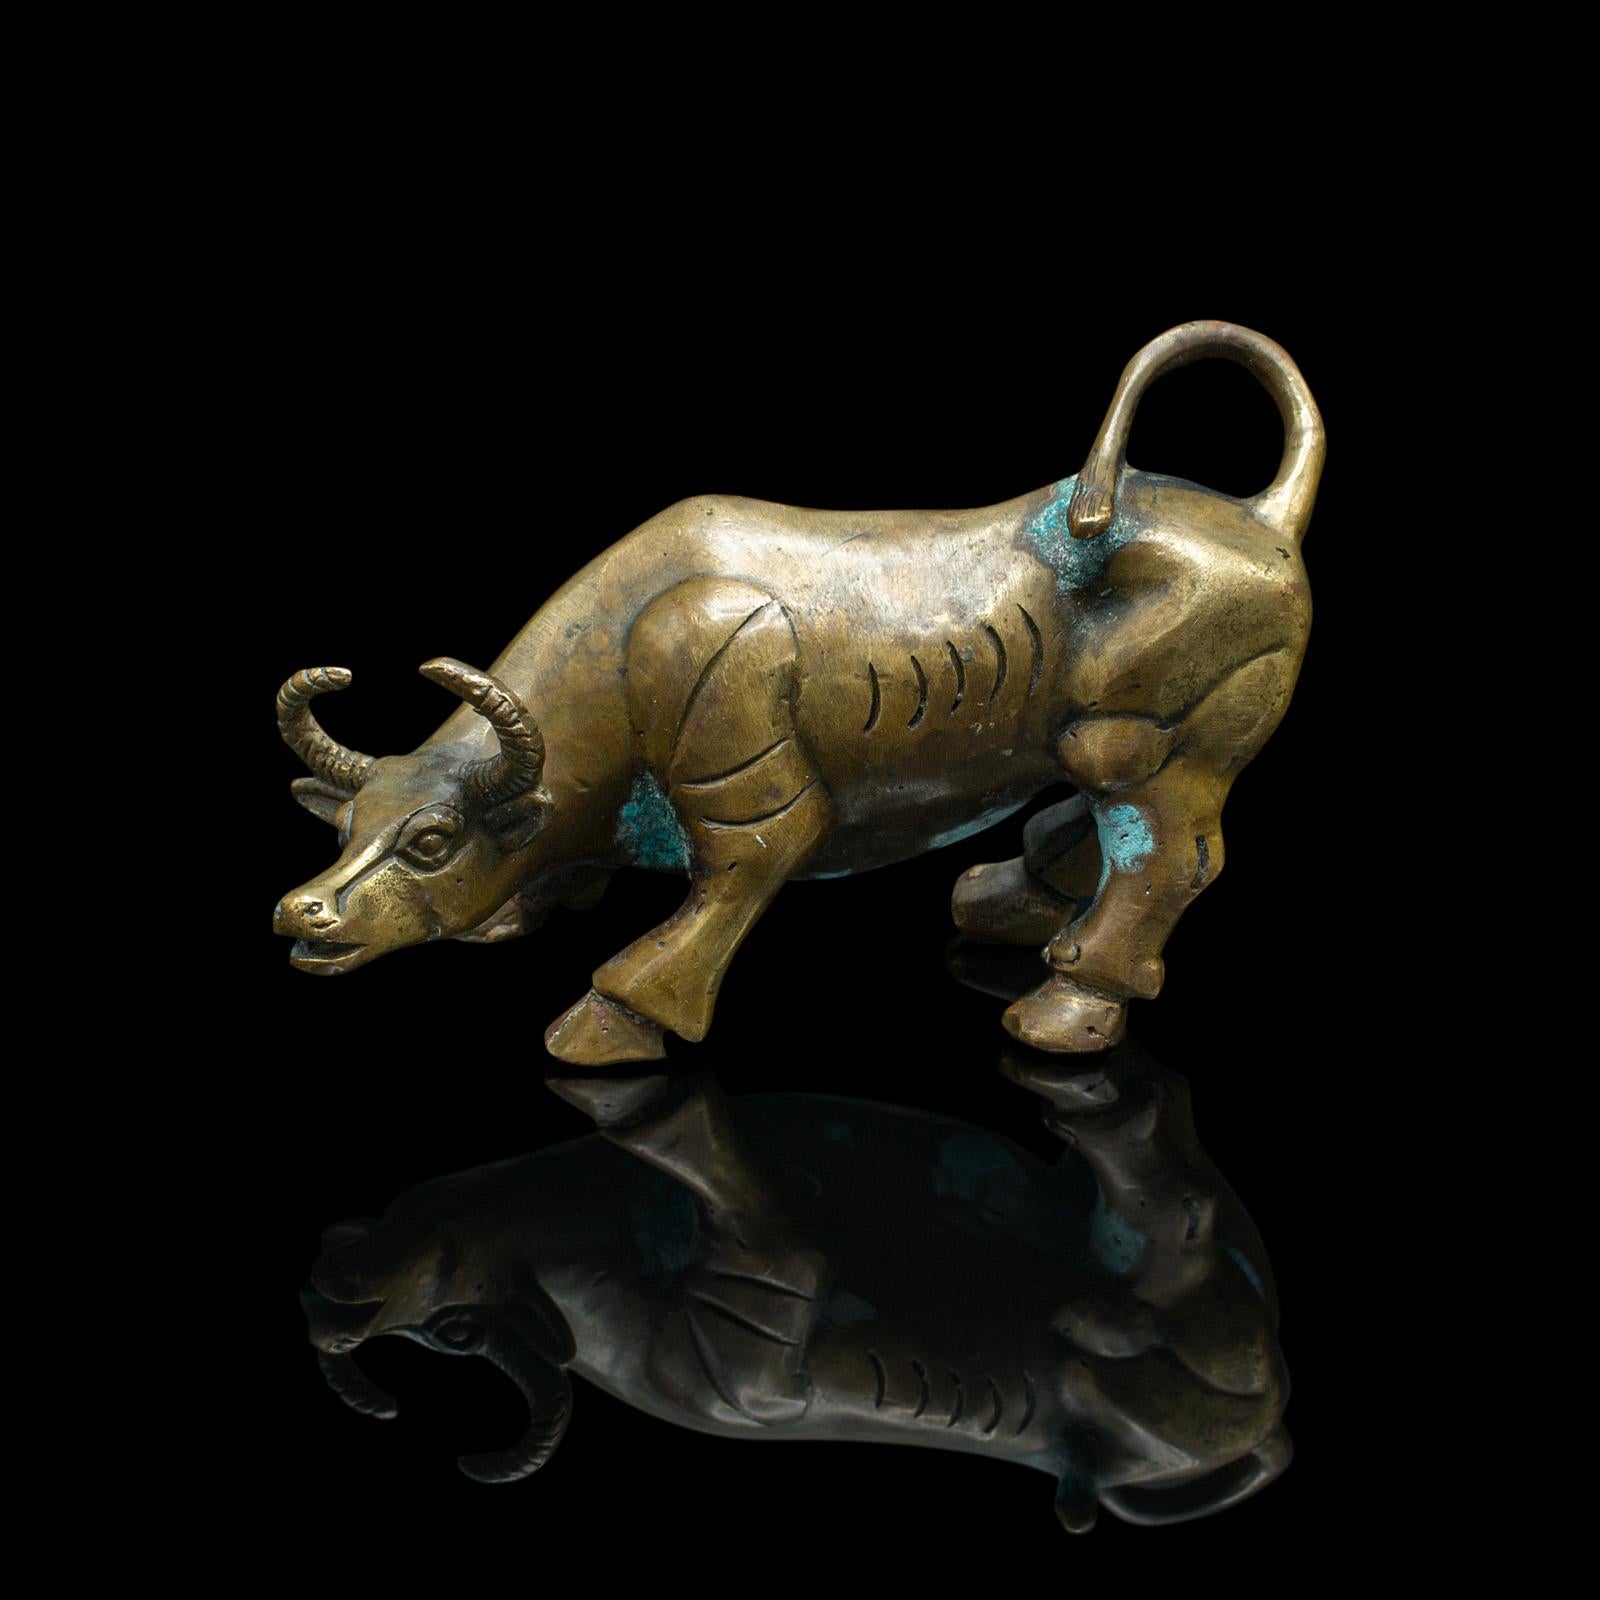 This is a small antique decorative water buffalo. A Malayan, bronze figure, dating to the Victorian period, circa 1900.

Distinctive stance with a nicely patinated appearance
Displays a desirable aged patina throughout
Bronze form presents golden